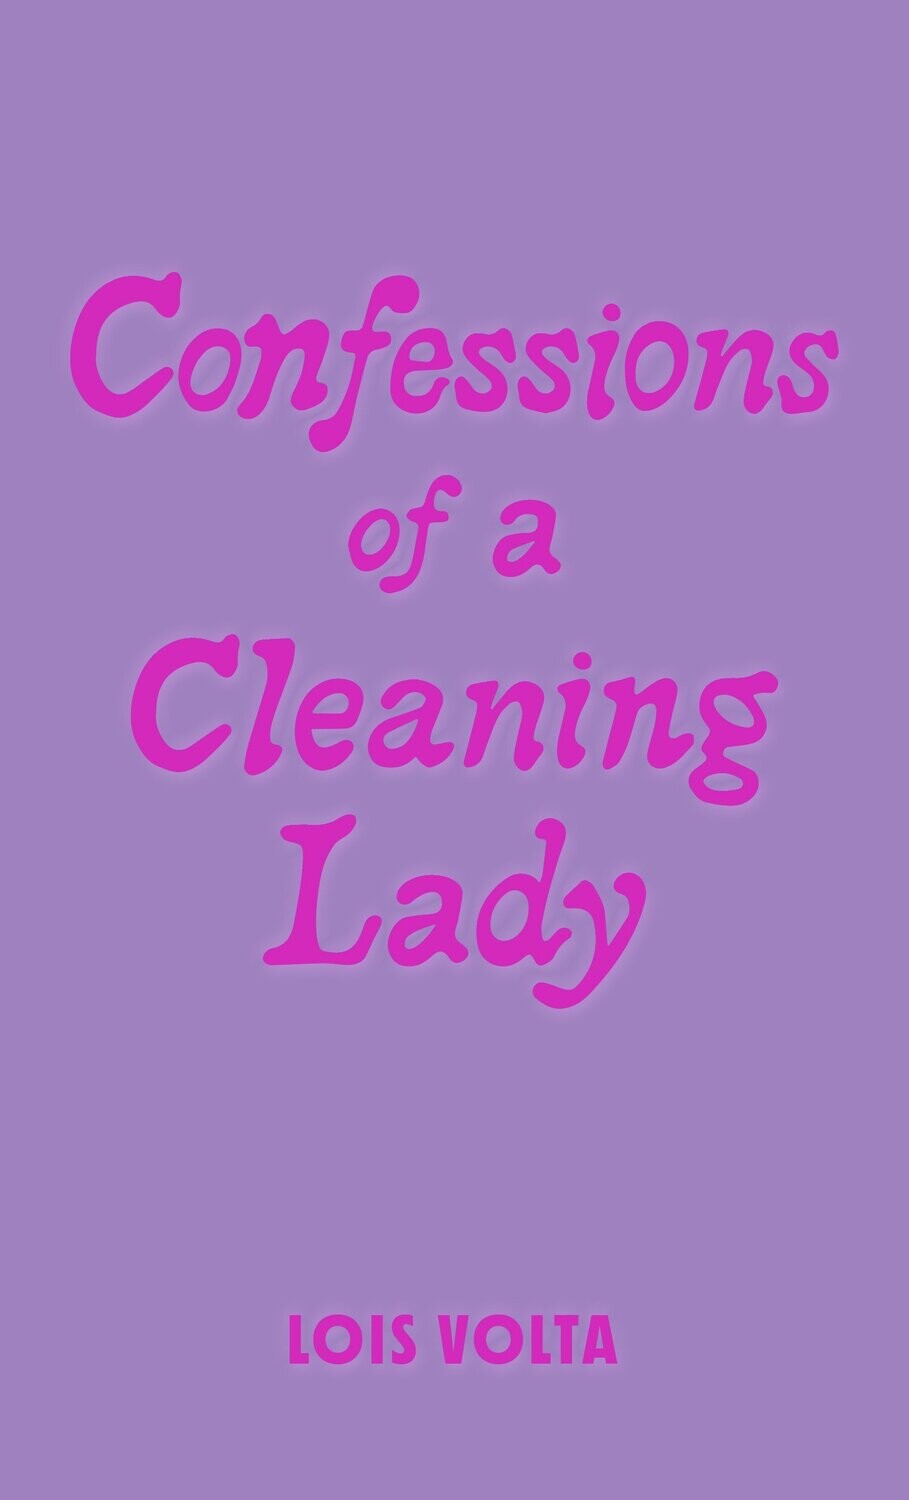 Confessions of A Cleaning Lady by Lois Volta